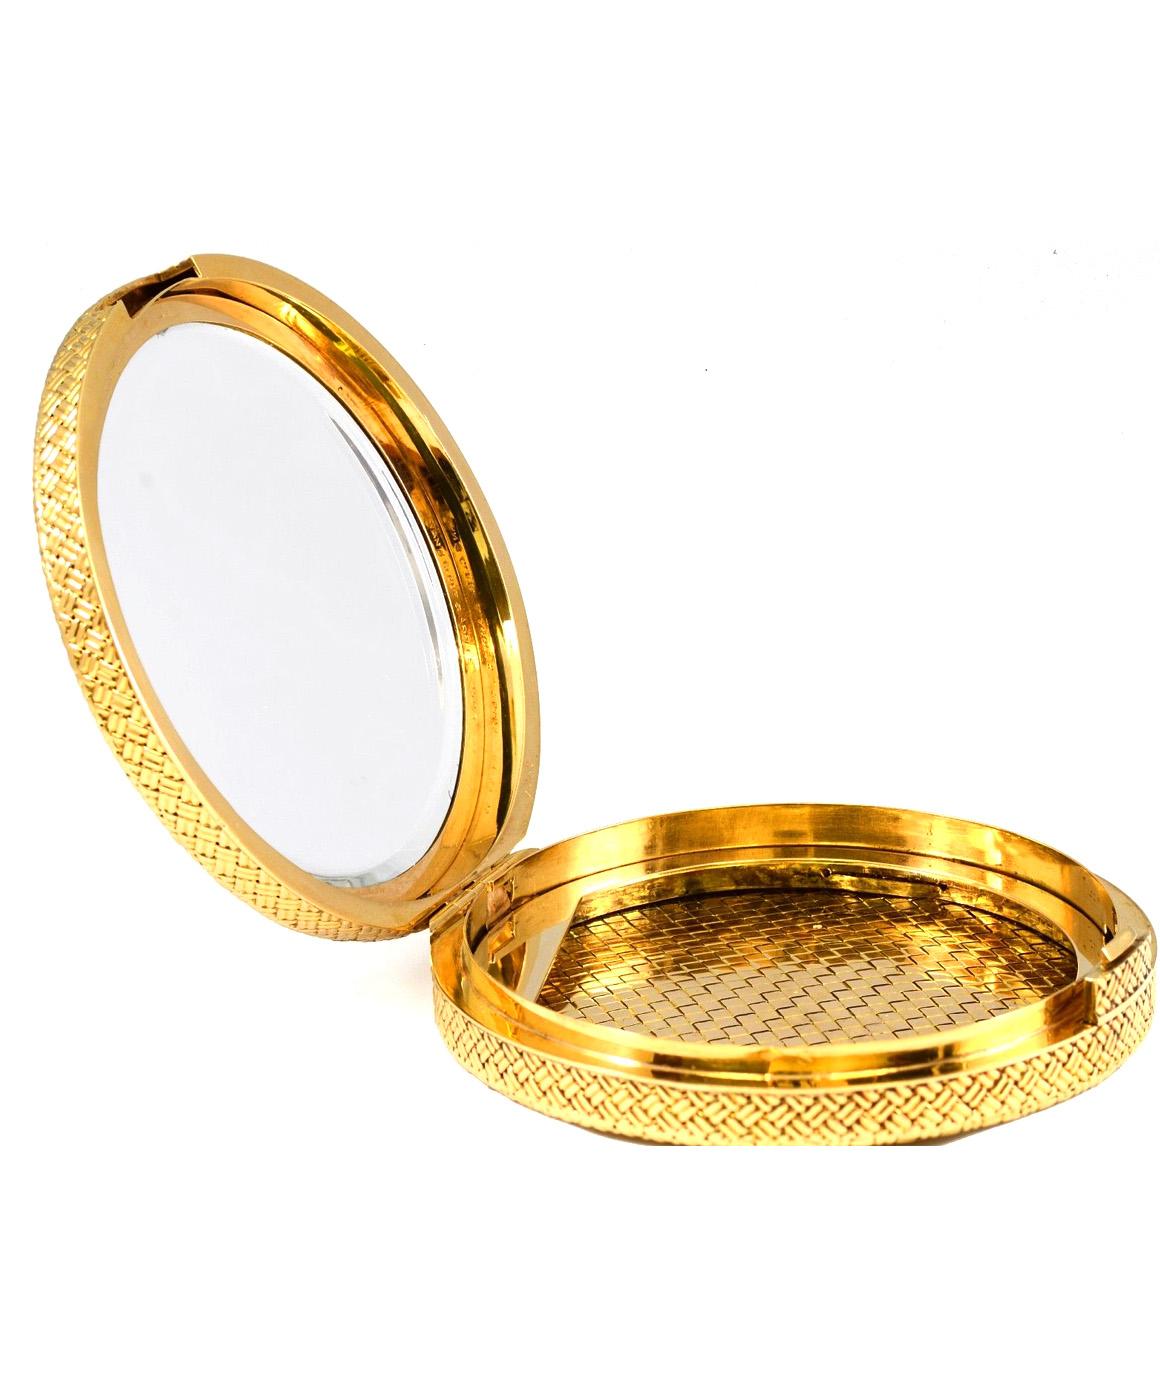 100% Authentic 1950's Van Cleef & Arpels Woven Solid 18K Yellow Gold Woven Compact! This compact weighs 113.2 grams, and is in Excellent Condition!  This gold compact is made by the highly important Paris Jewelry House, Van Cleef & Arpels. The